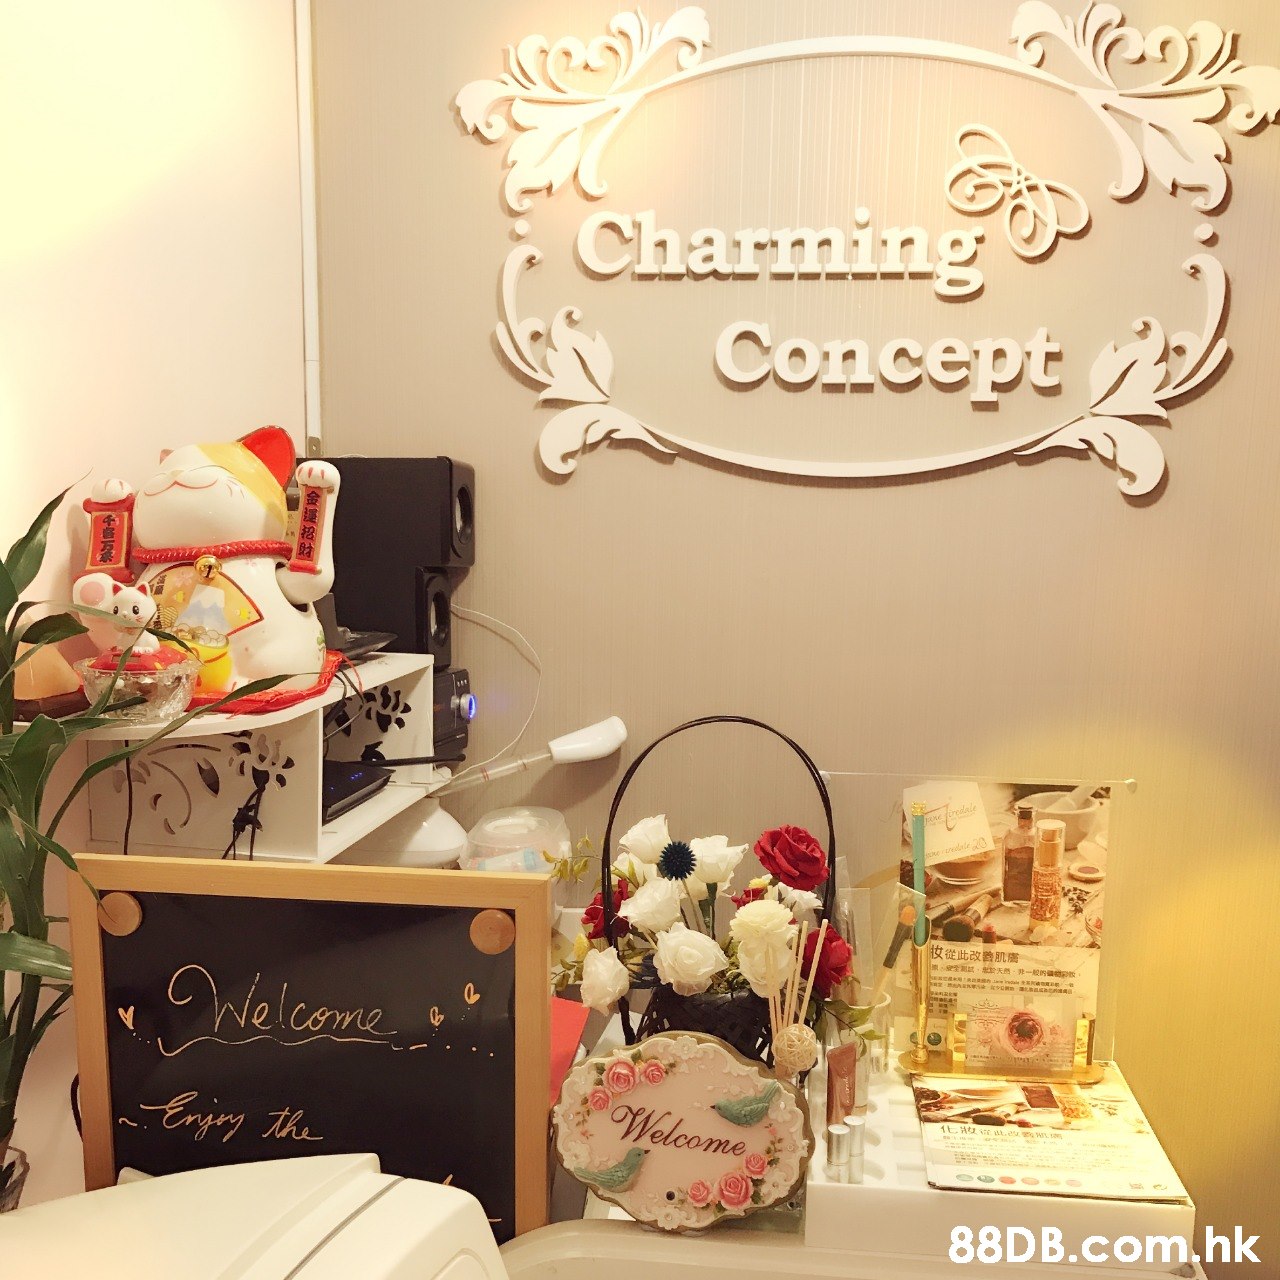 Charming Concept f realale 收從此改善肌廣 nelceme Welcome Erjey the .hk  Room,Product,Yellow,Interior design,Furniture